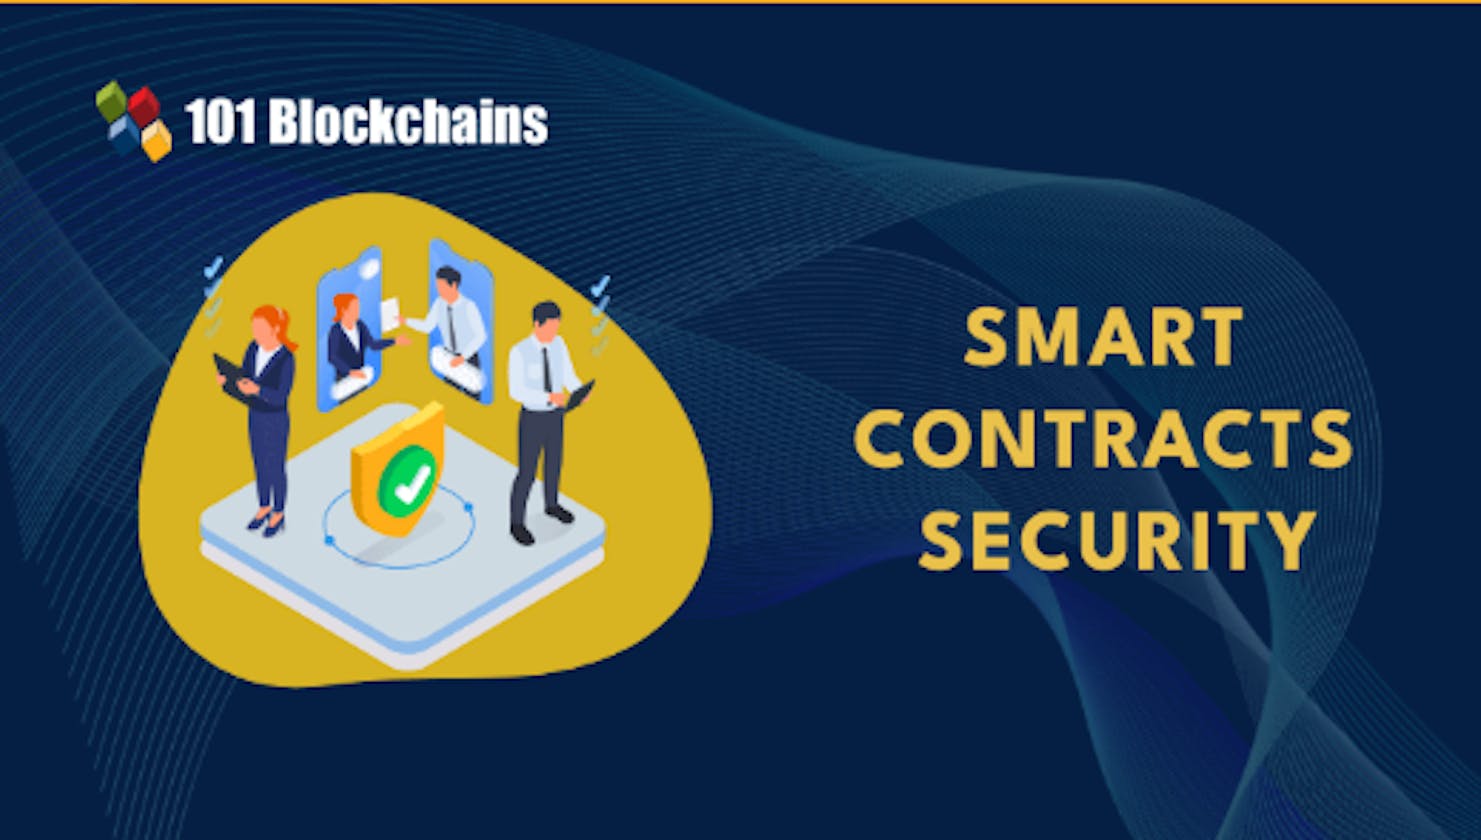 Learn Smart Contracts Security - 101 Blockchains